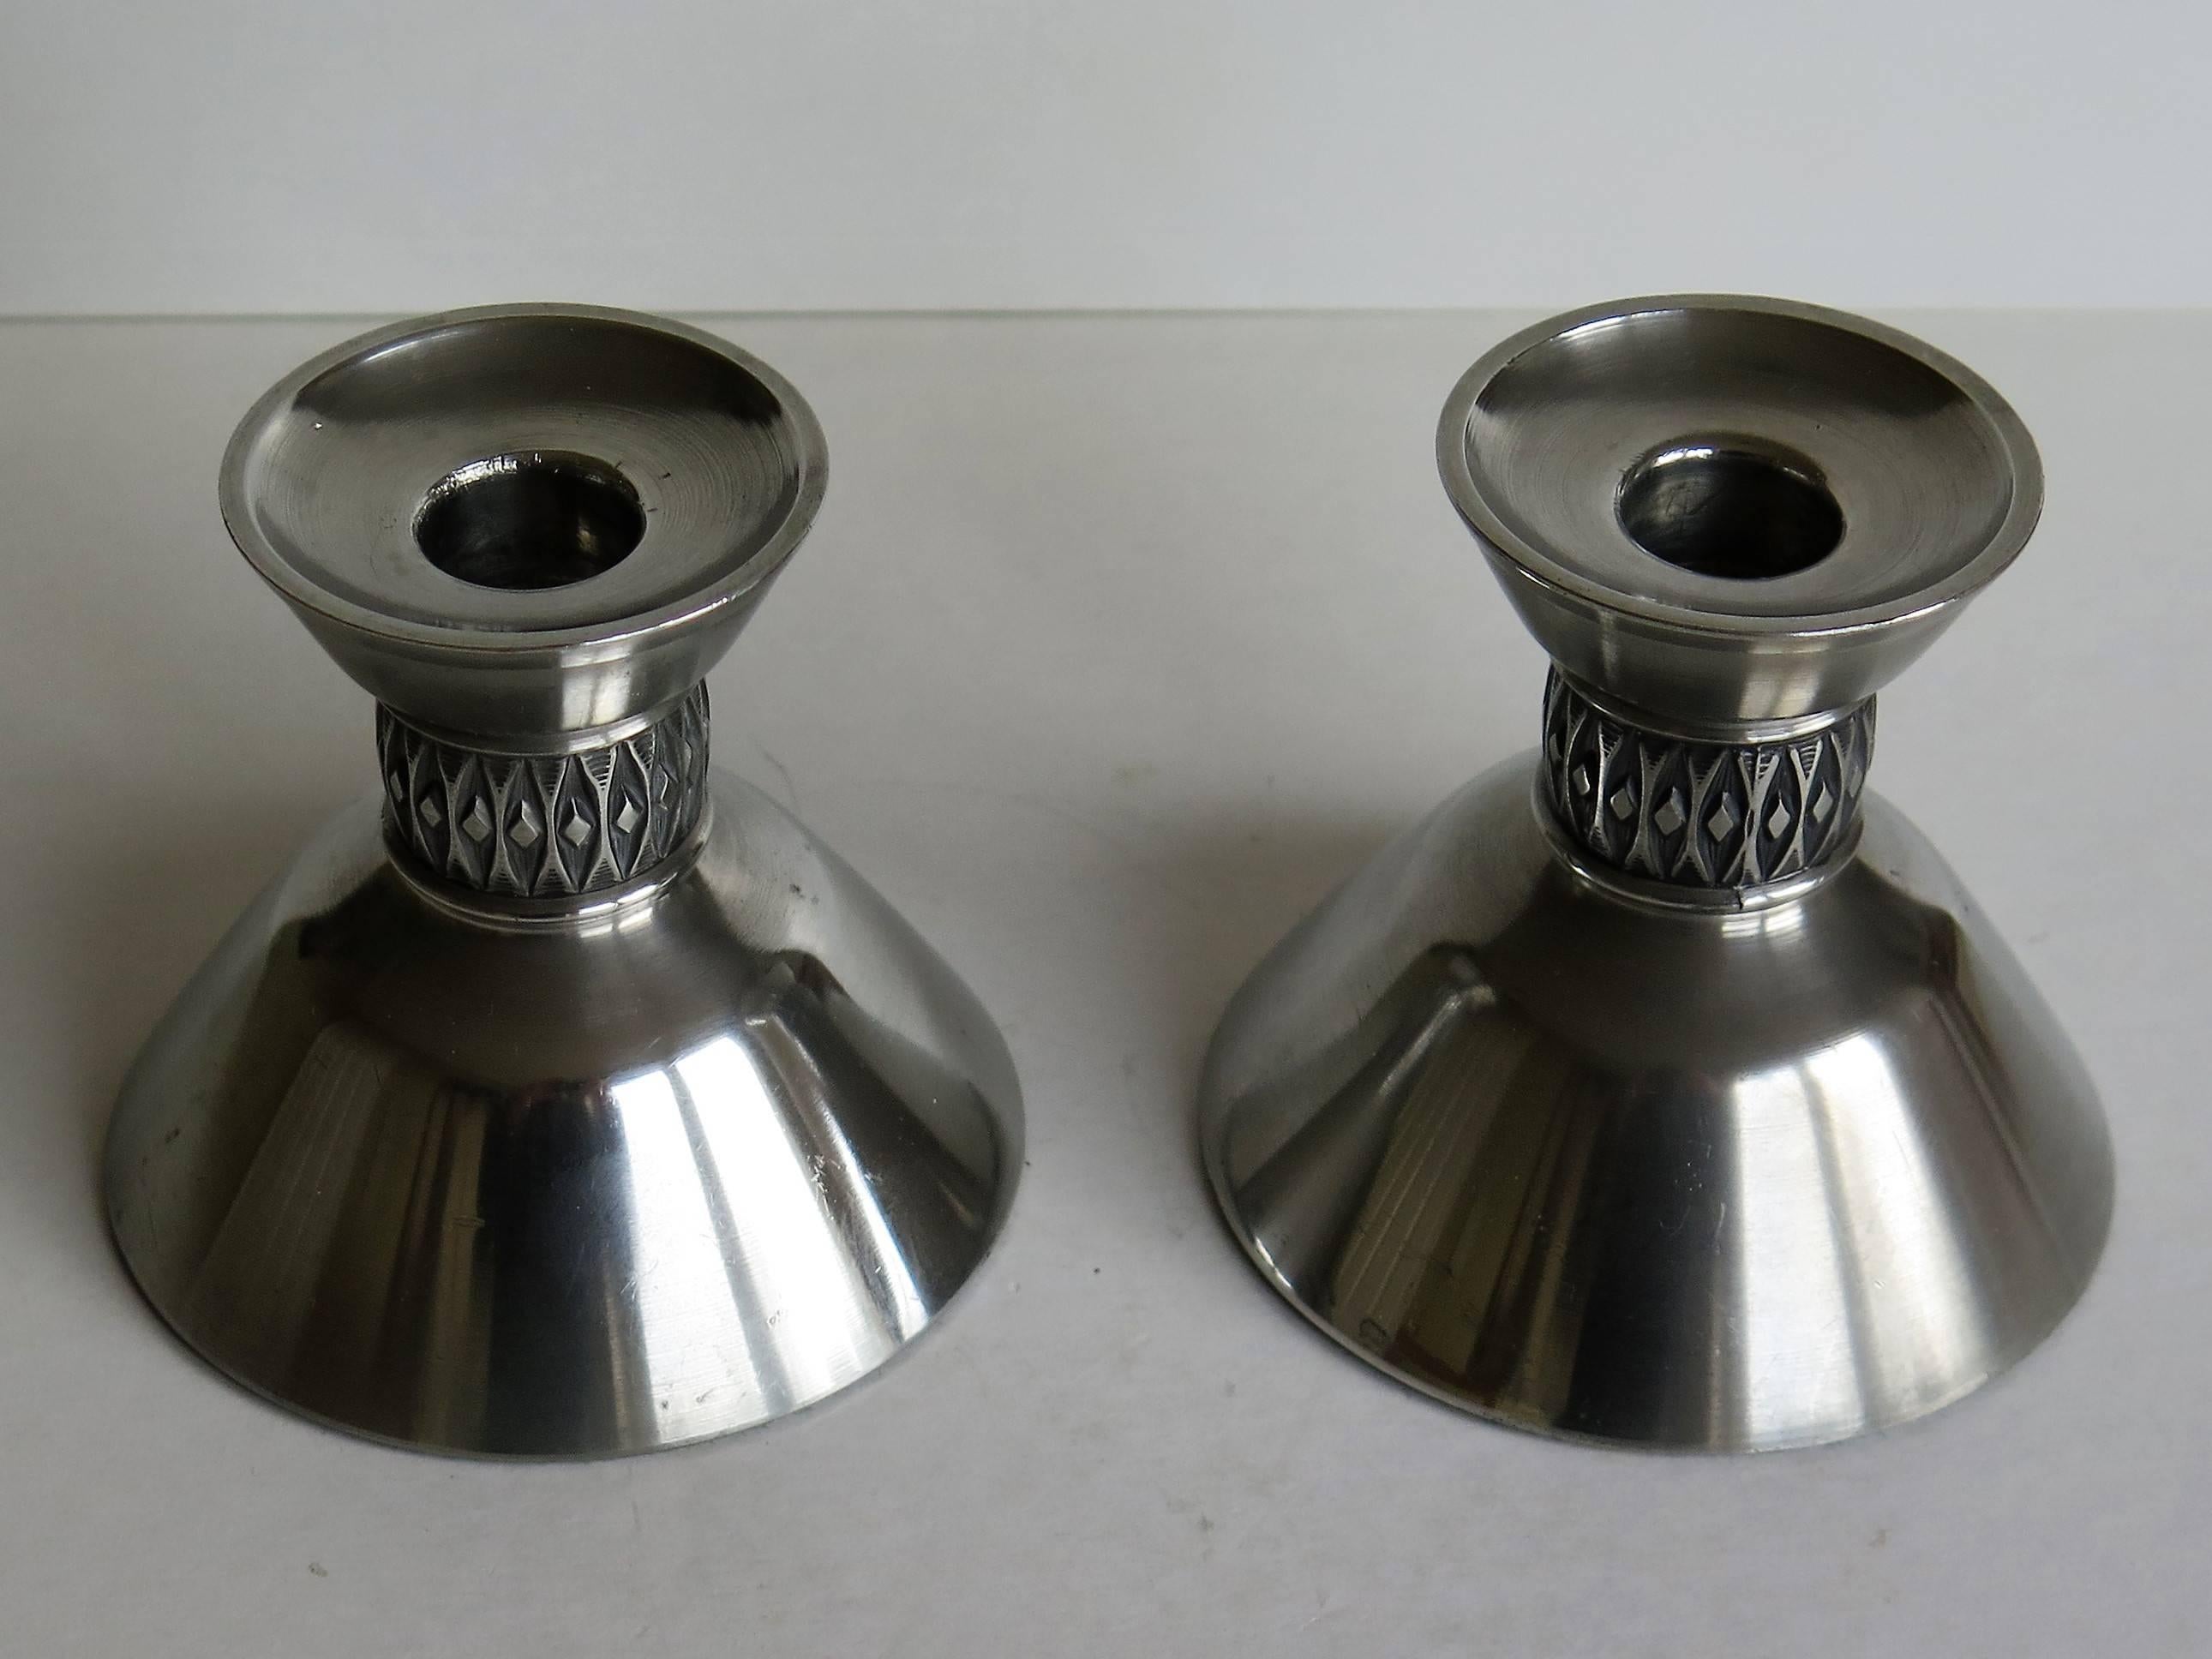 These are a good PAIR of Mid-Century Pewter Candle holders made by Mastad Pewter, Norway and signed 101 which is the model or design number.

The candleholders are probably cast, then polished and have a continuous raised diamond in an ellipse motif